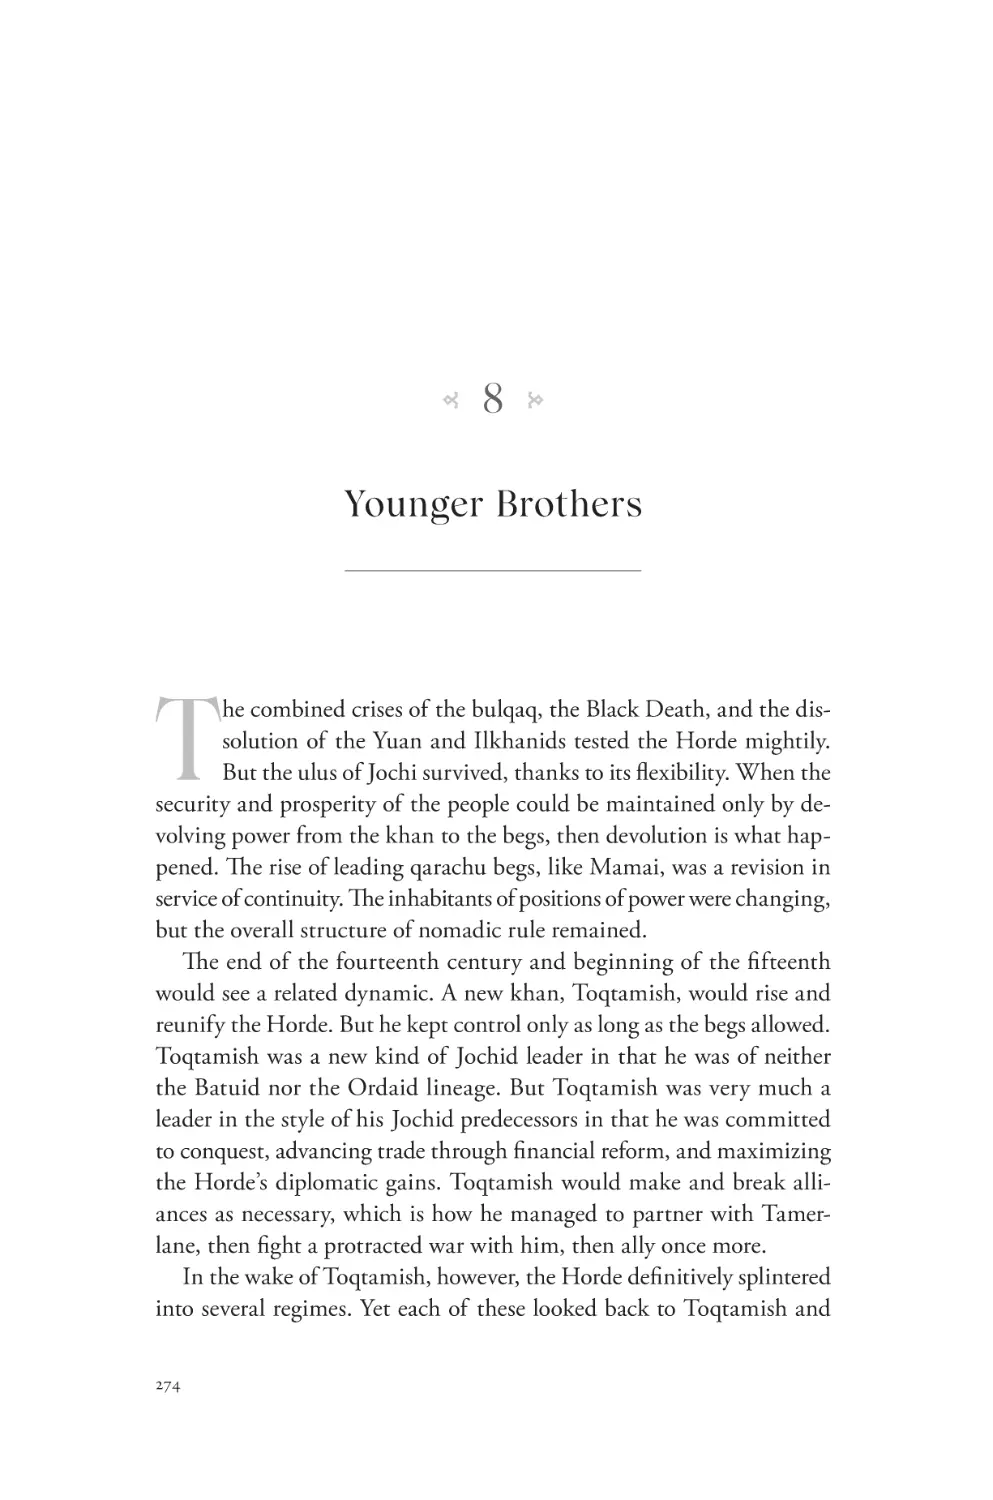 8. Younger Brothers